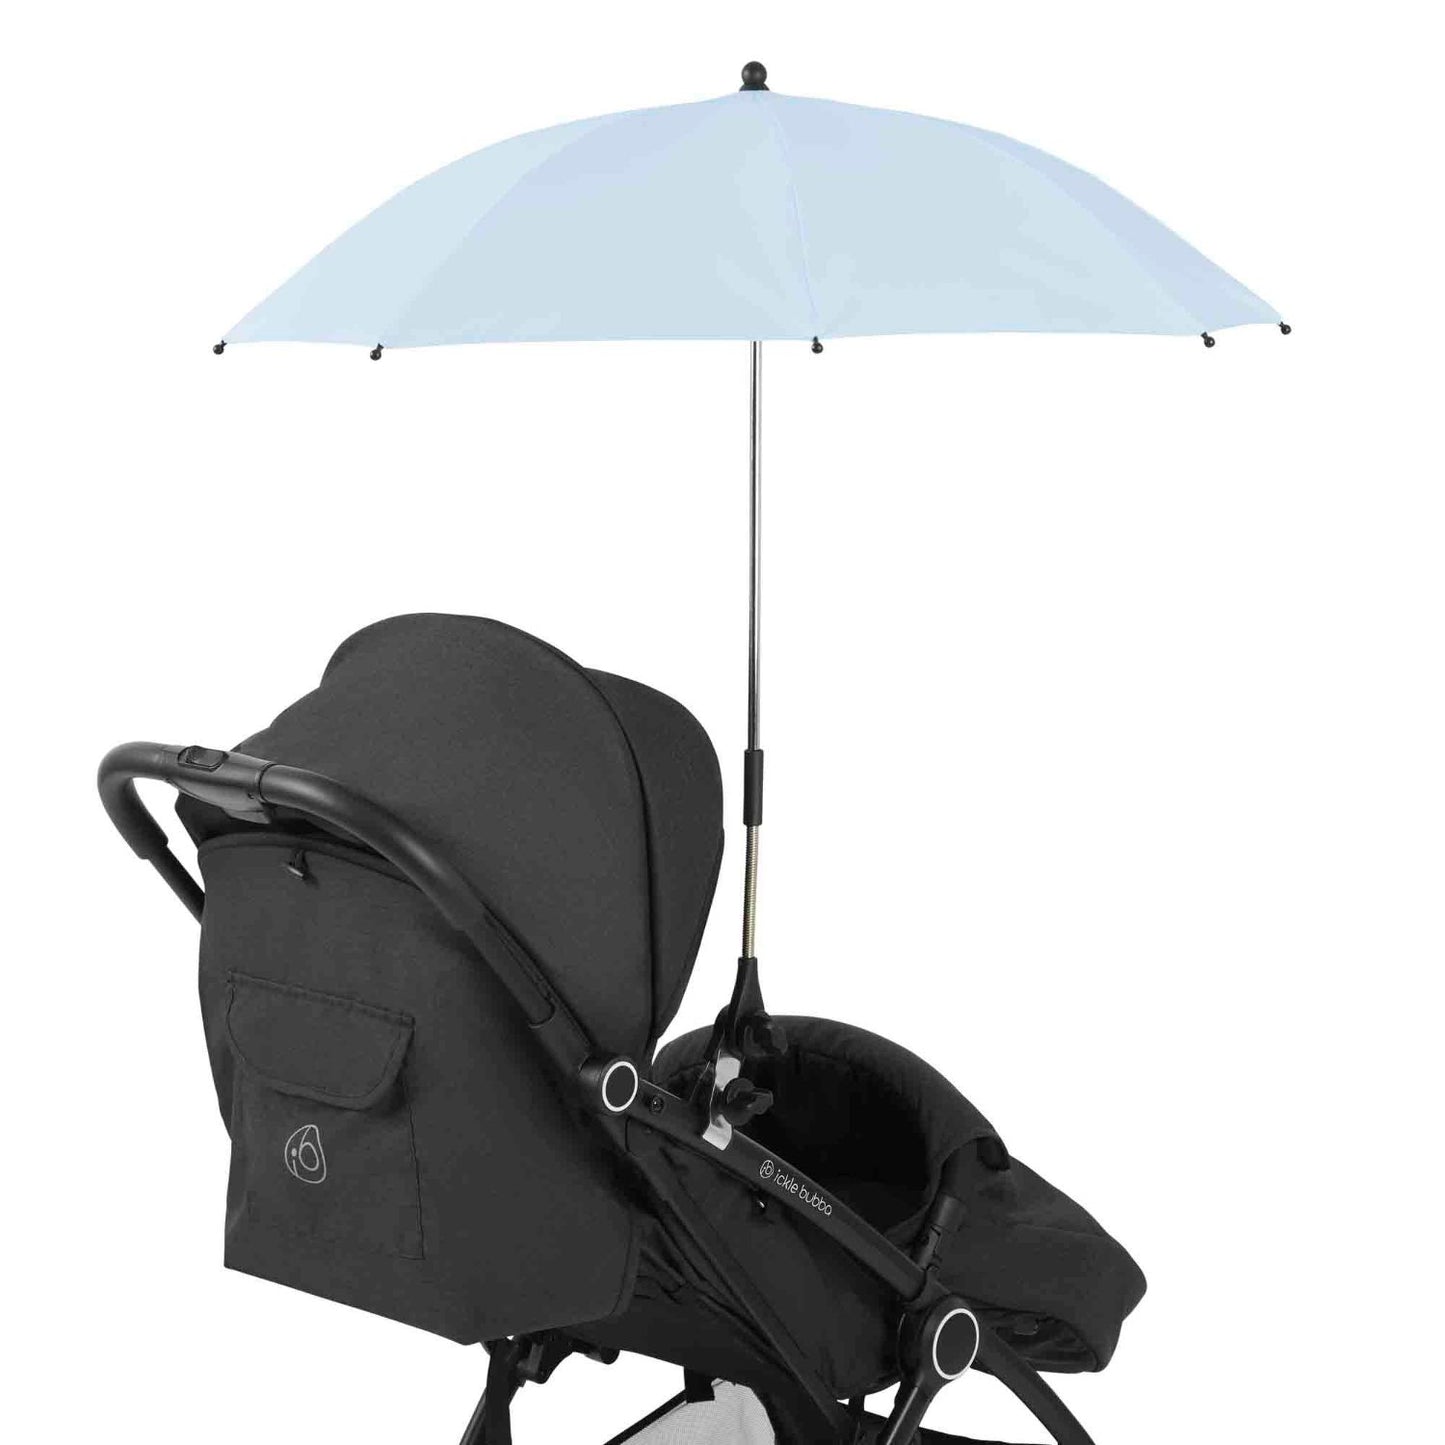 Ickle Bubba Parasol Universal Travel Accessory in Blue colour attached to a black Ickle Bubba stroller